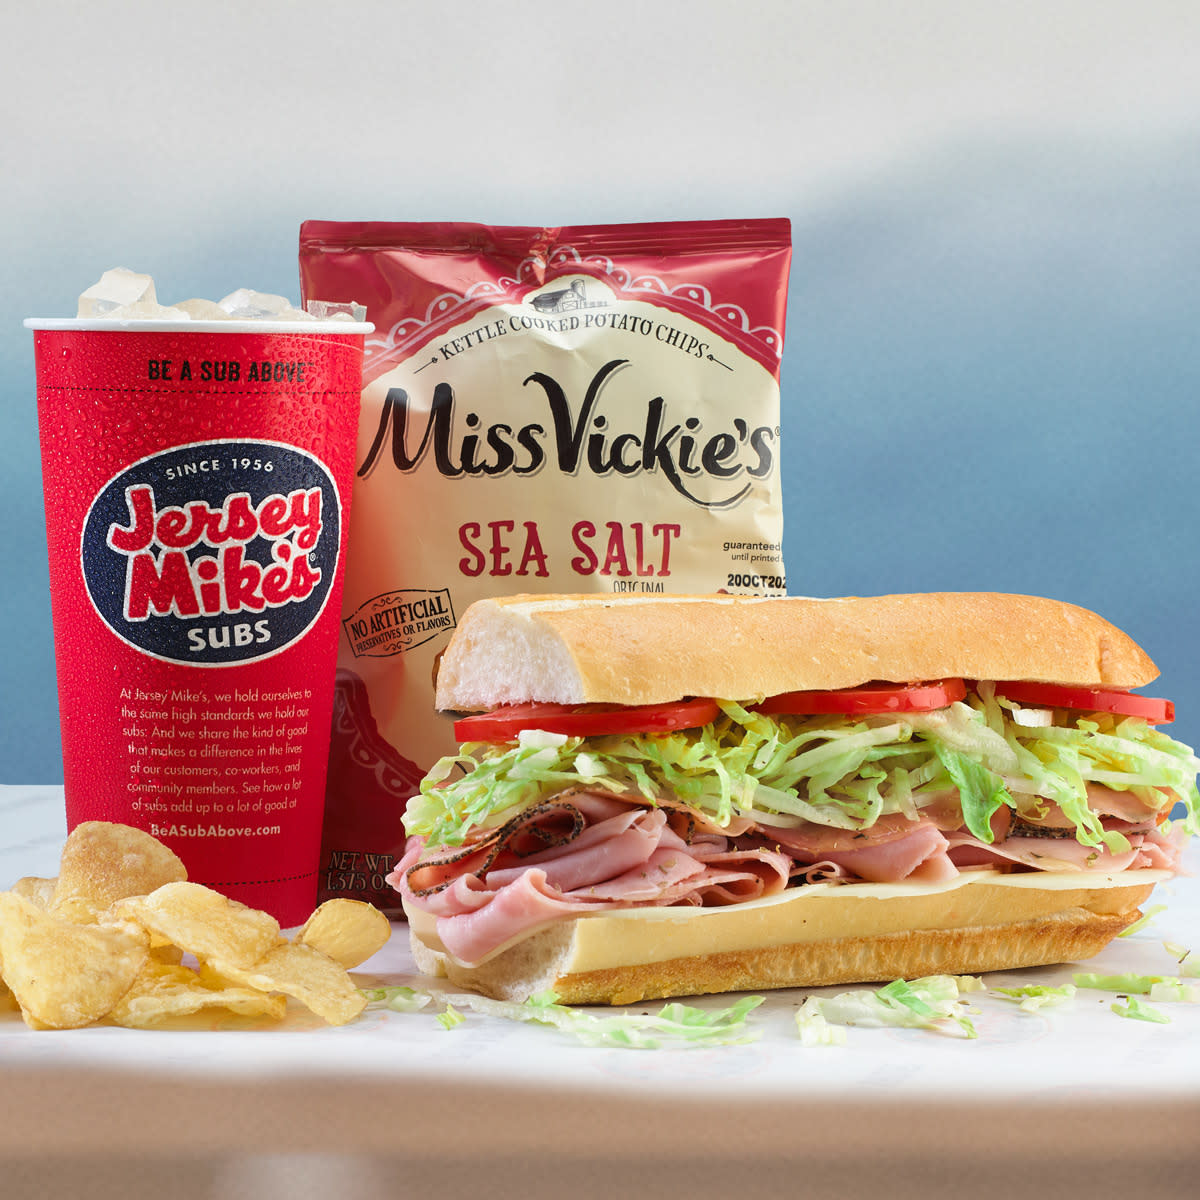 Sandwich Catering - Lunch Catering - Dinner Catering - Jersey Mike's